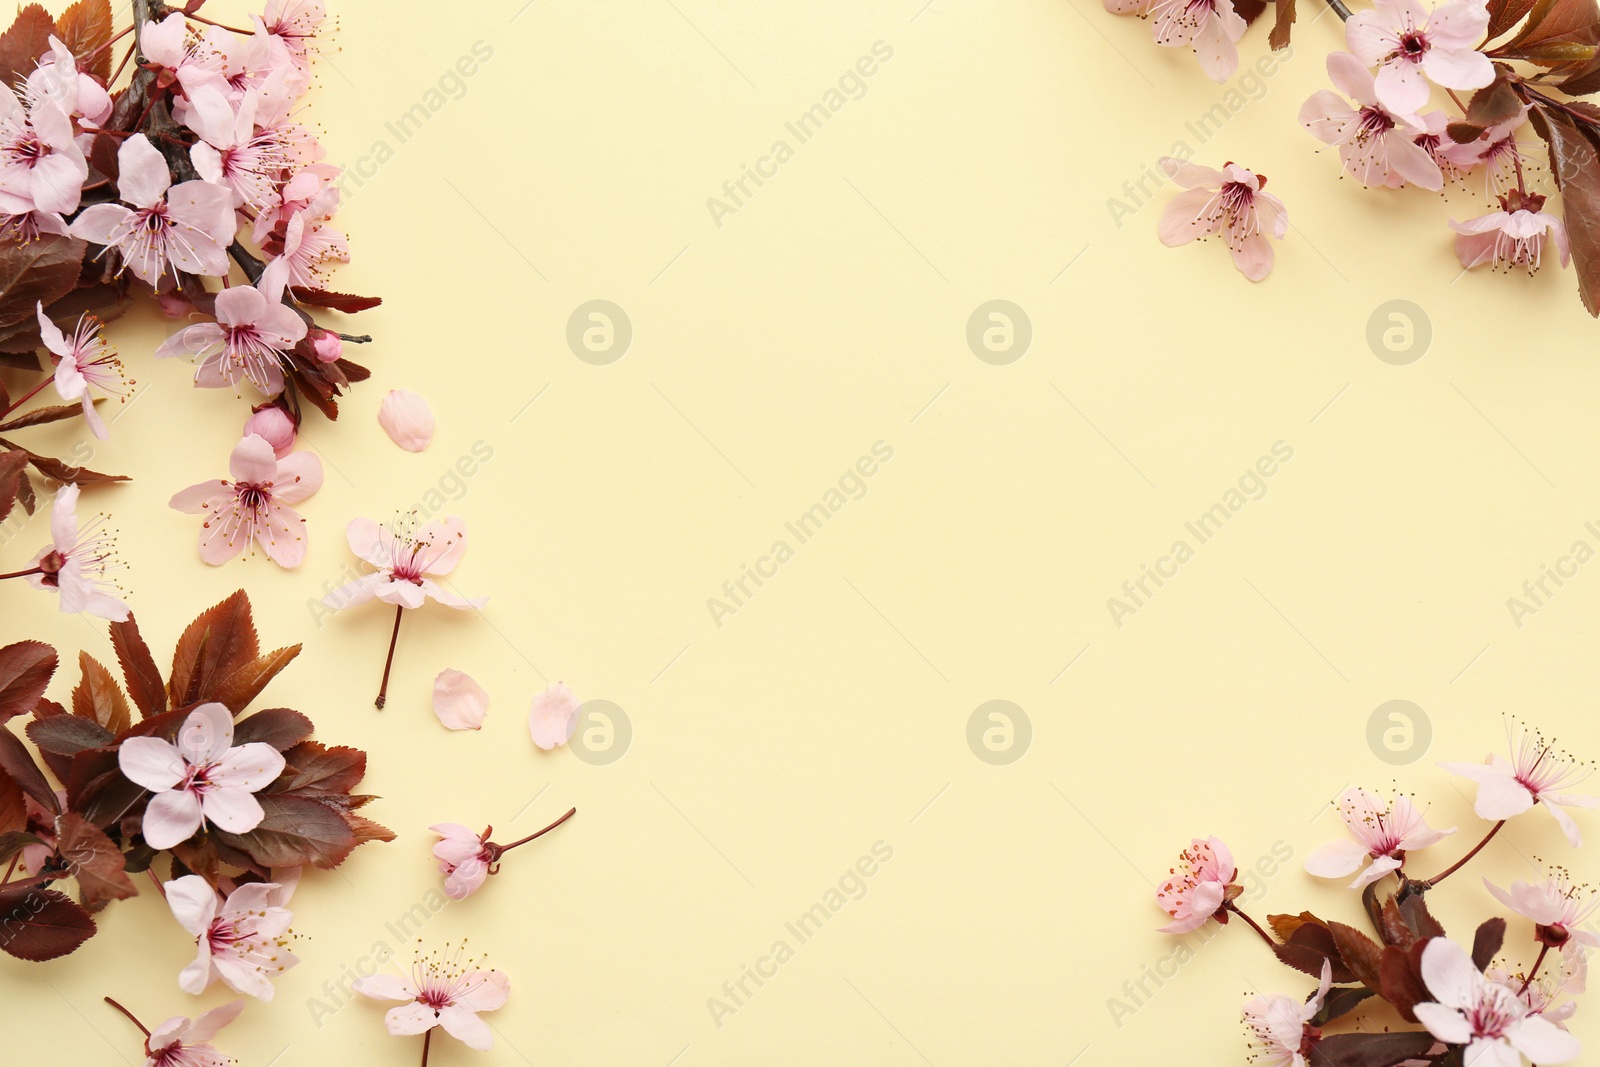 Photo of Spring tree branches with beautiful blossoms, flowers and petals on yellow background, flat lay. Space for text